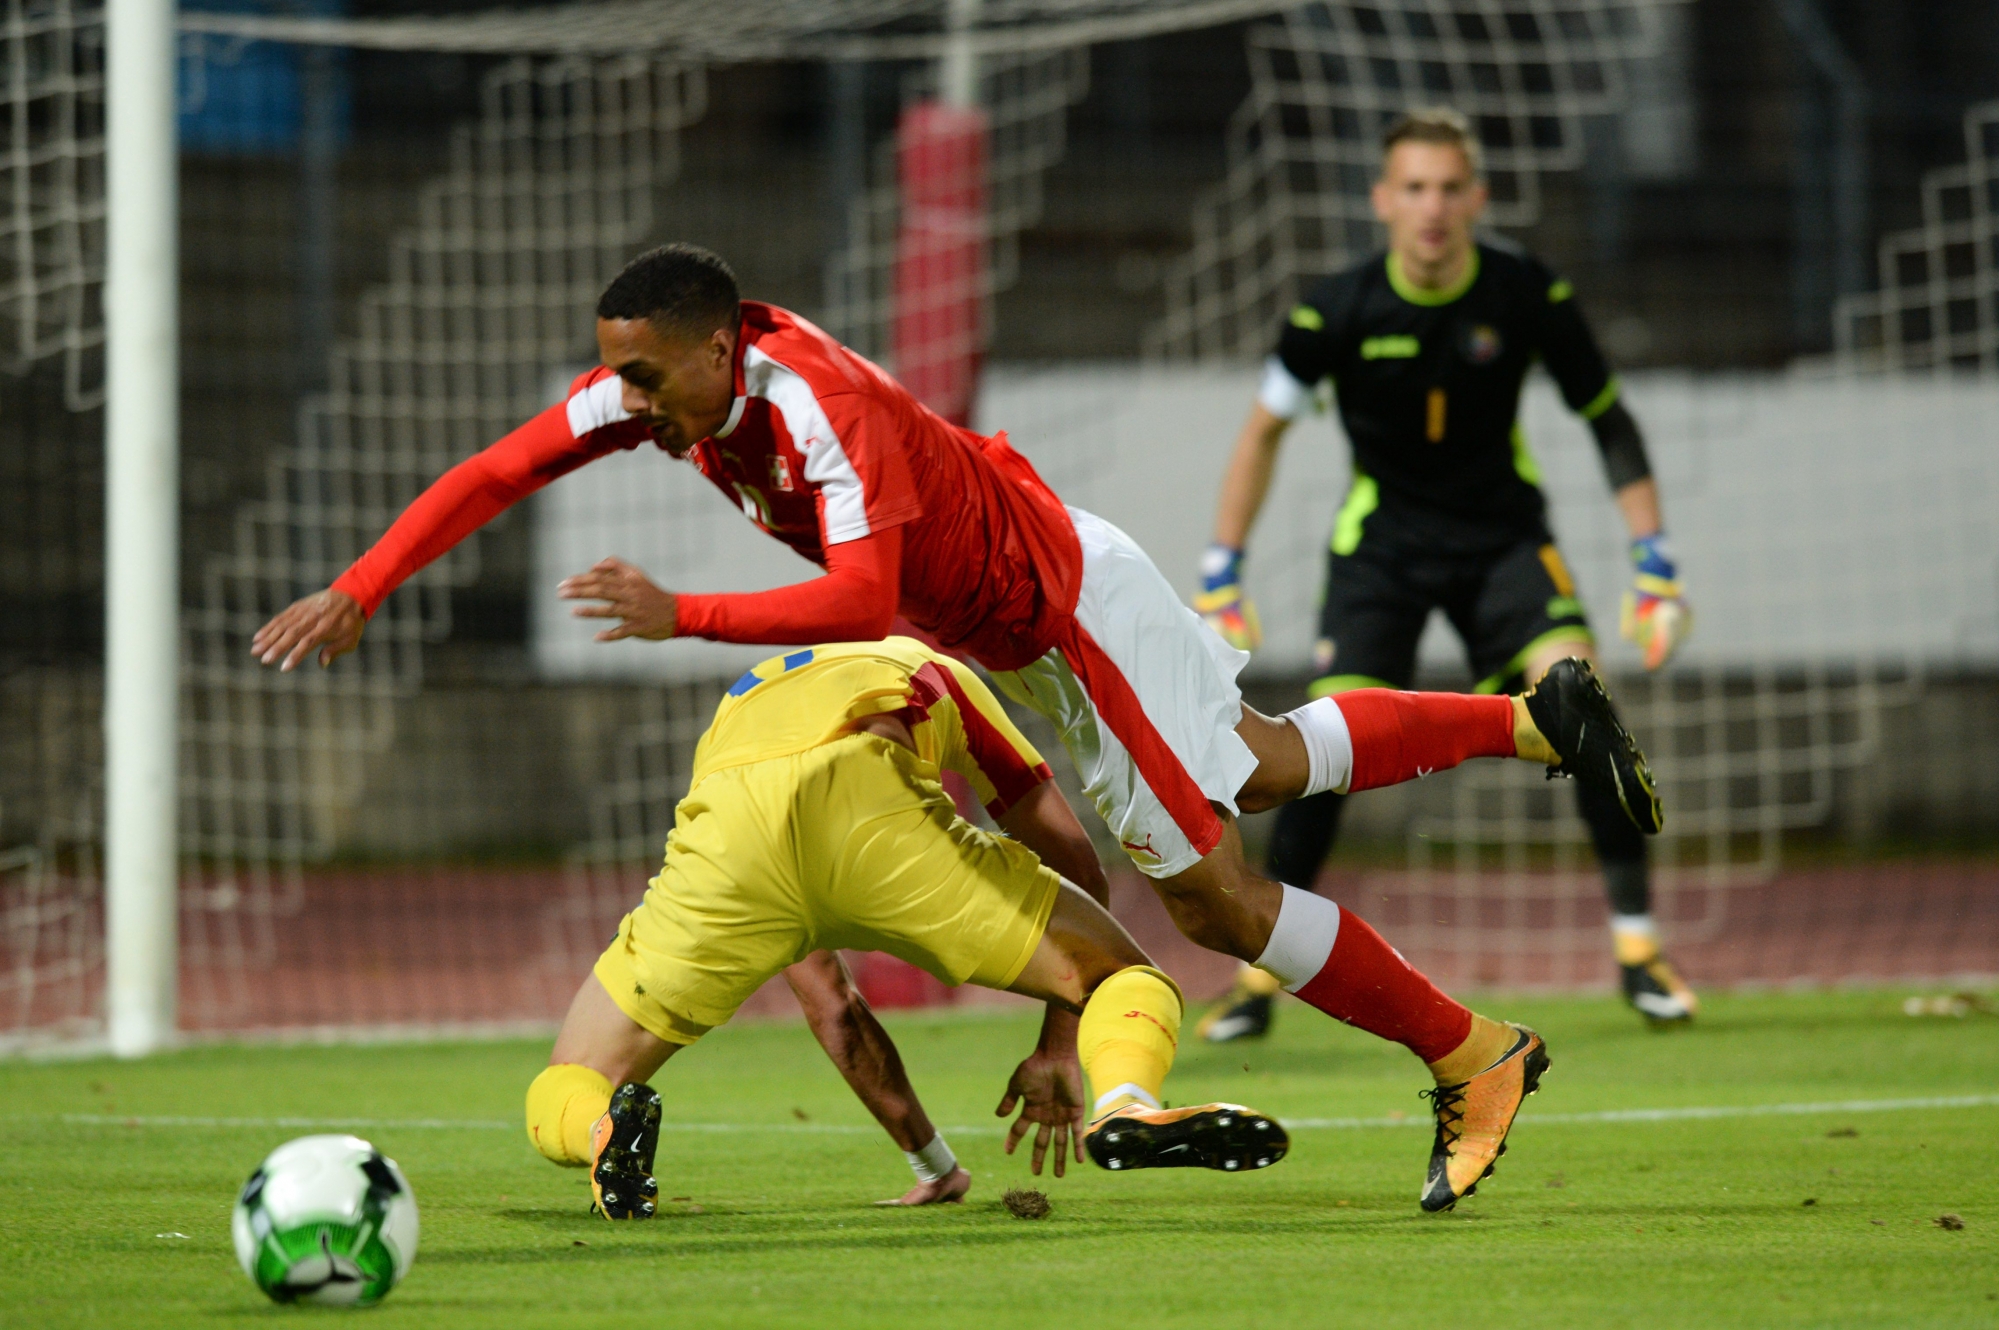 Swiss player Marvin Spielmann, left, and Romania's player Cristian Manea, right, fight for the ball during the UEFA U21 Euro qualifier soccer match between Switzerland and Romania at the Cornaredo stadium in Lugano, Switzerland, Friday, October 6, 2017. (KEYSTONE/Ti-Press/Davide Agosta)

 FUSSBALL U21 EM 2019 QUALIFIKATION CHE ROM